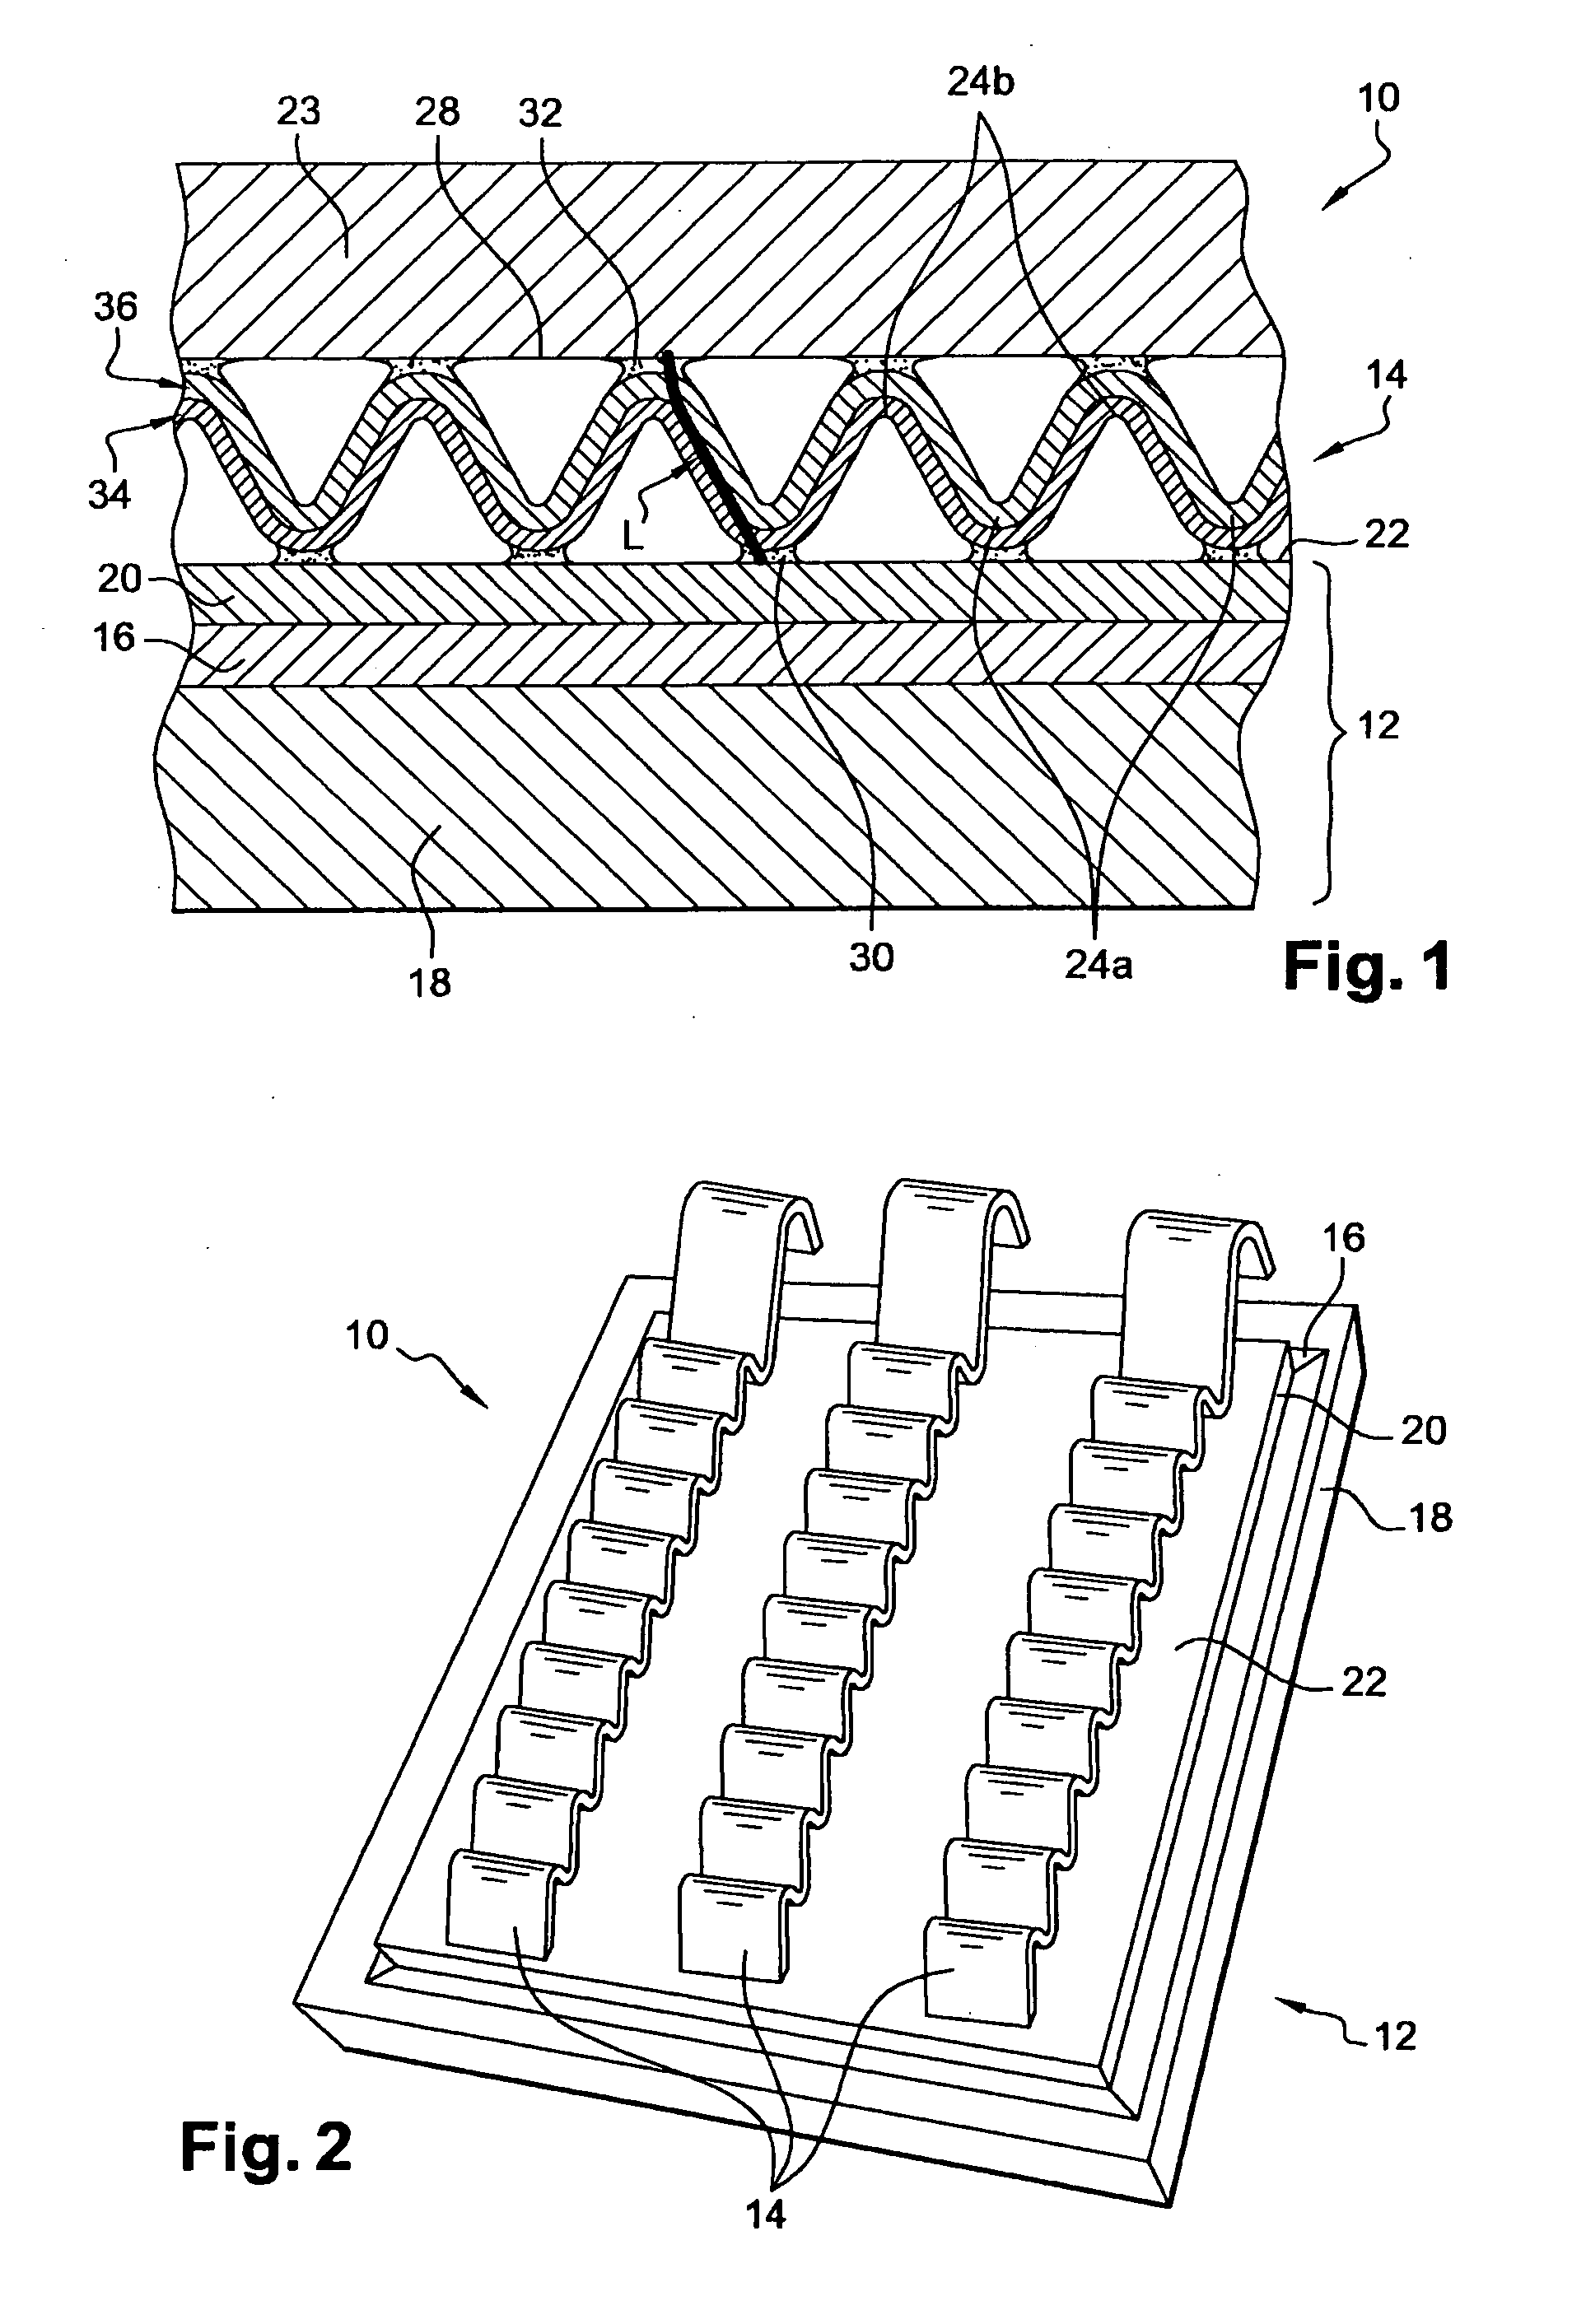 Electronic Module and a Method of Assembling Such a Module